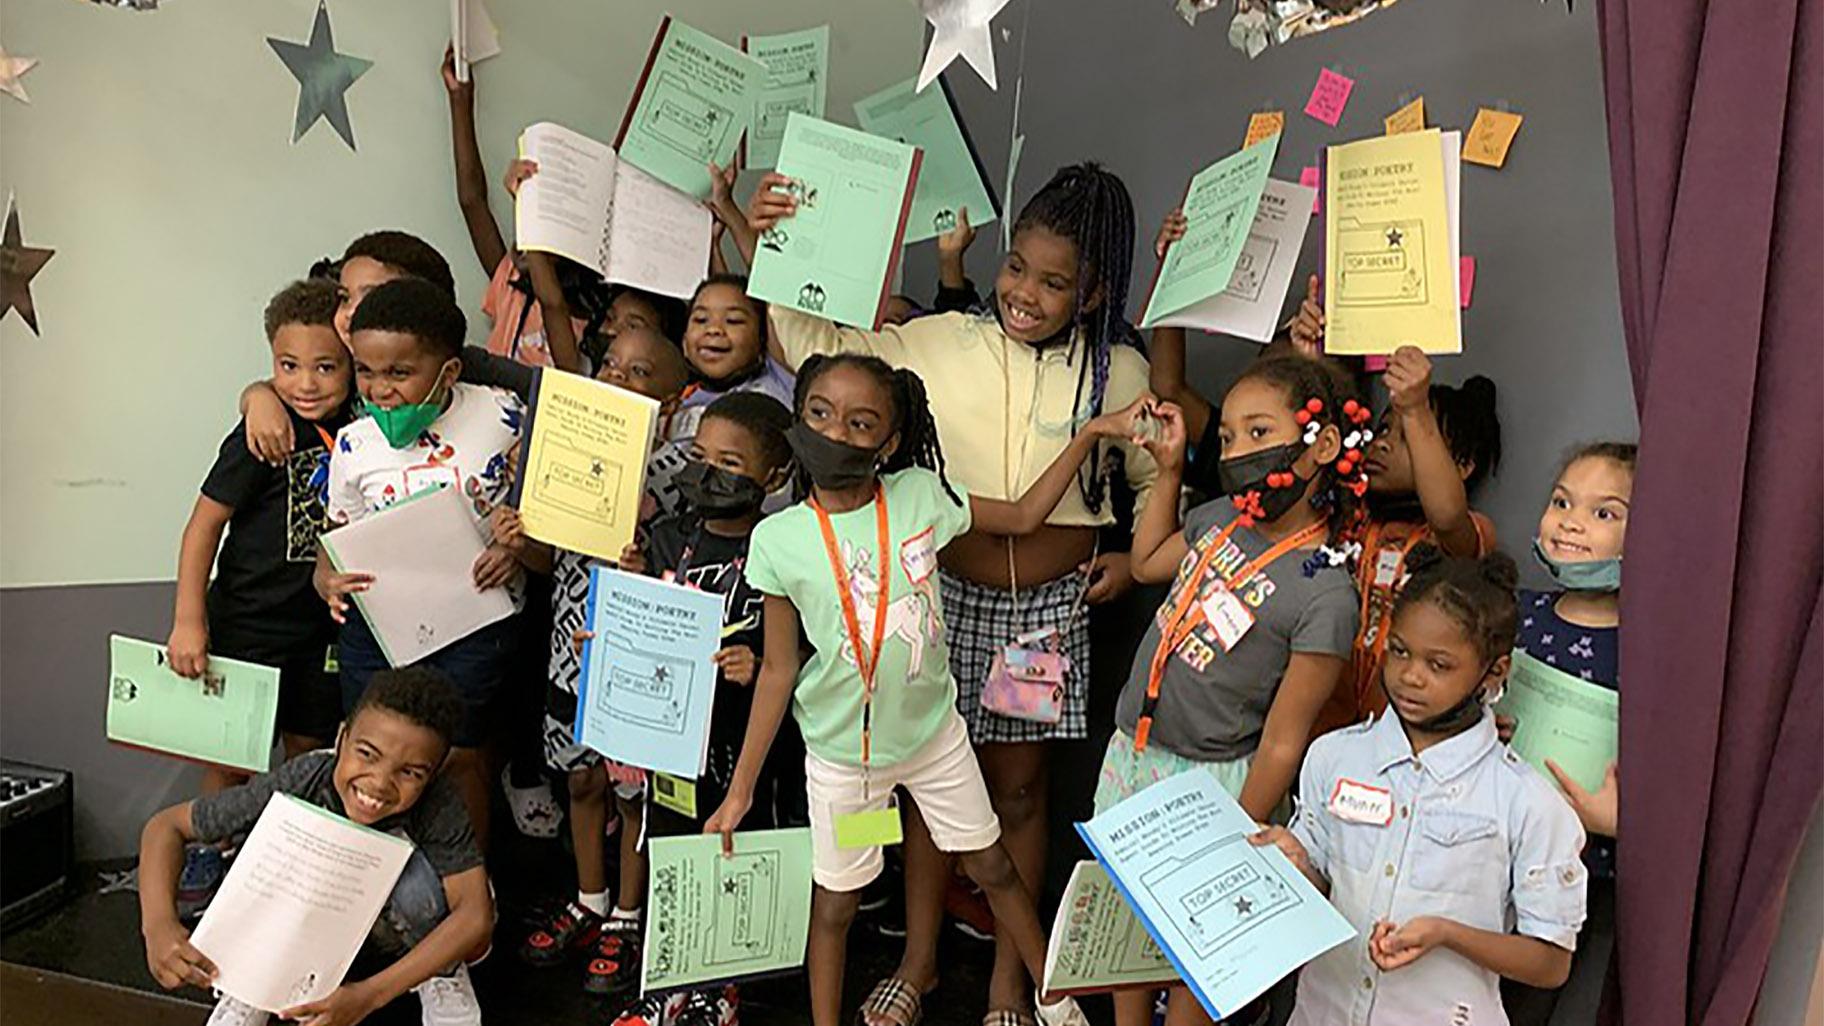 1st and 2nd grade students from the James Jordan Boys and Girls Club after the Mission: Poetry Field Trip workshop at 826CHI’s writing lab in Wicker Park. (Courtesy 826CHI)